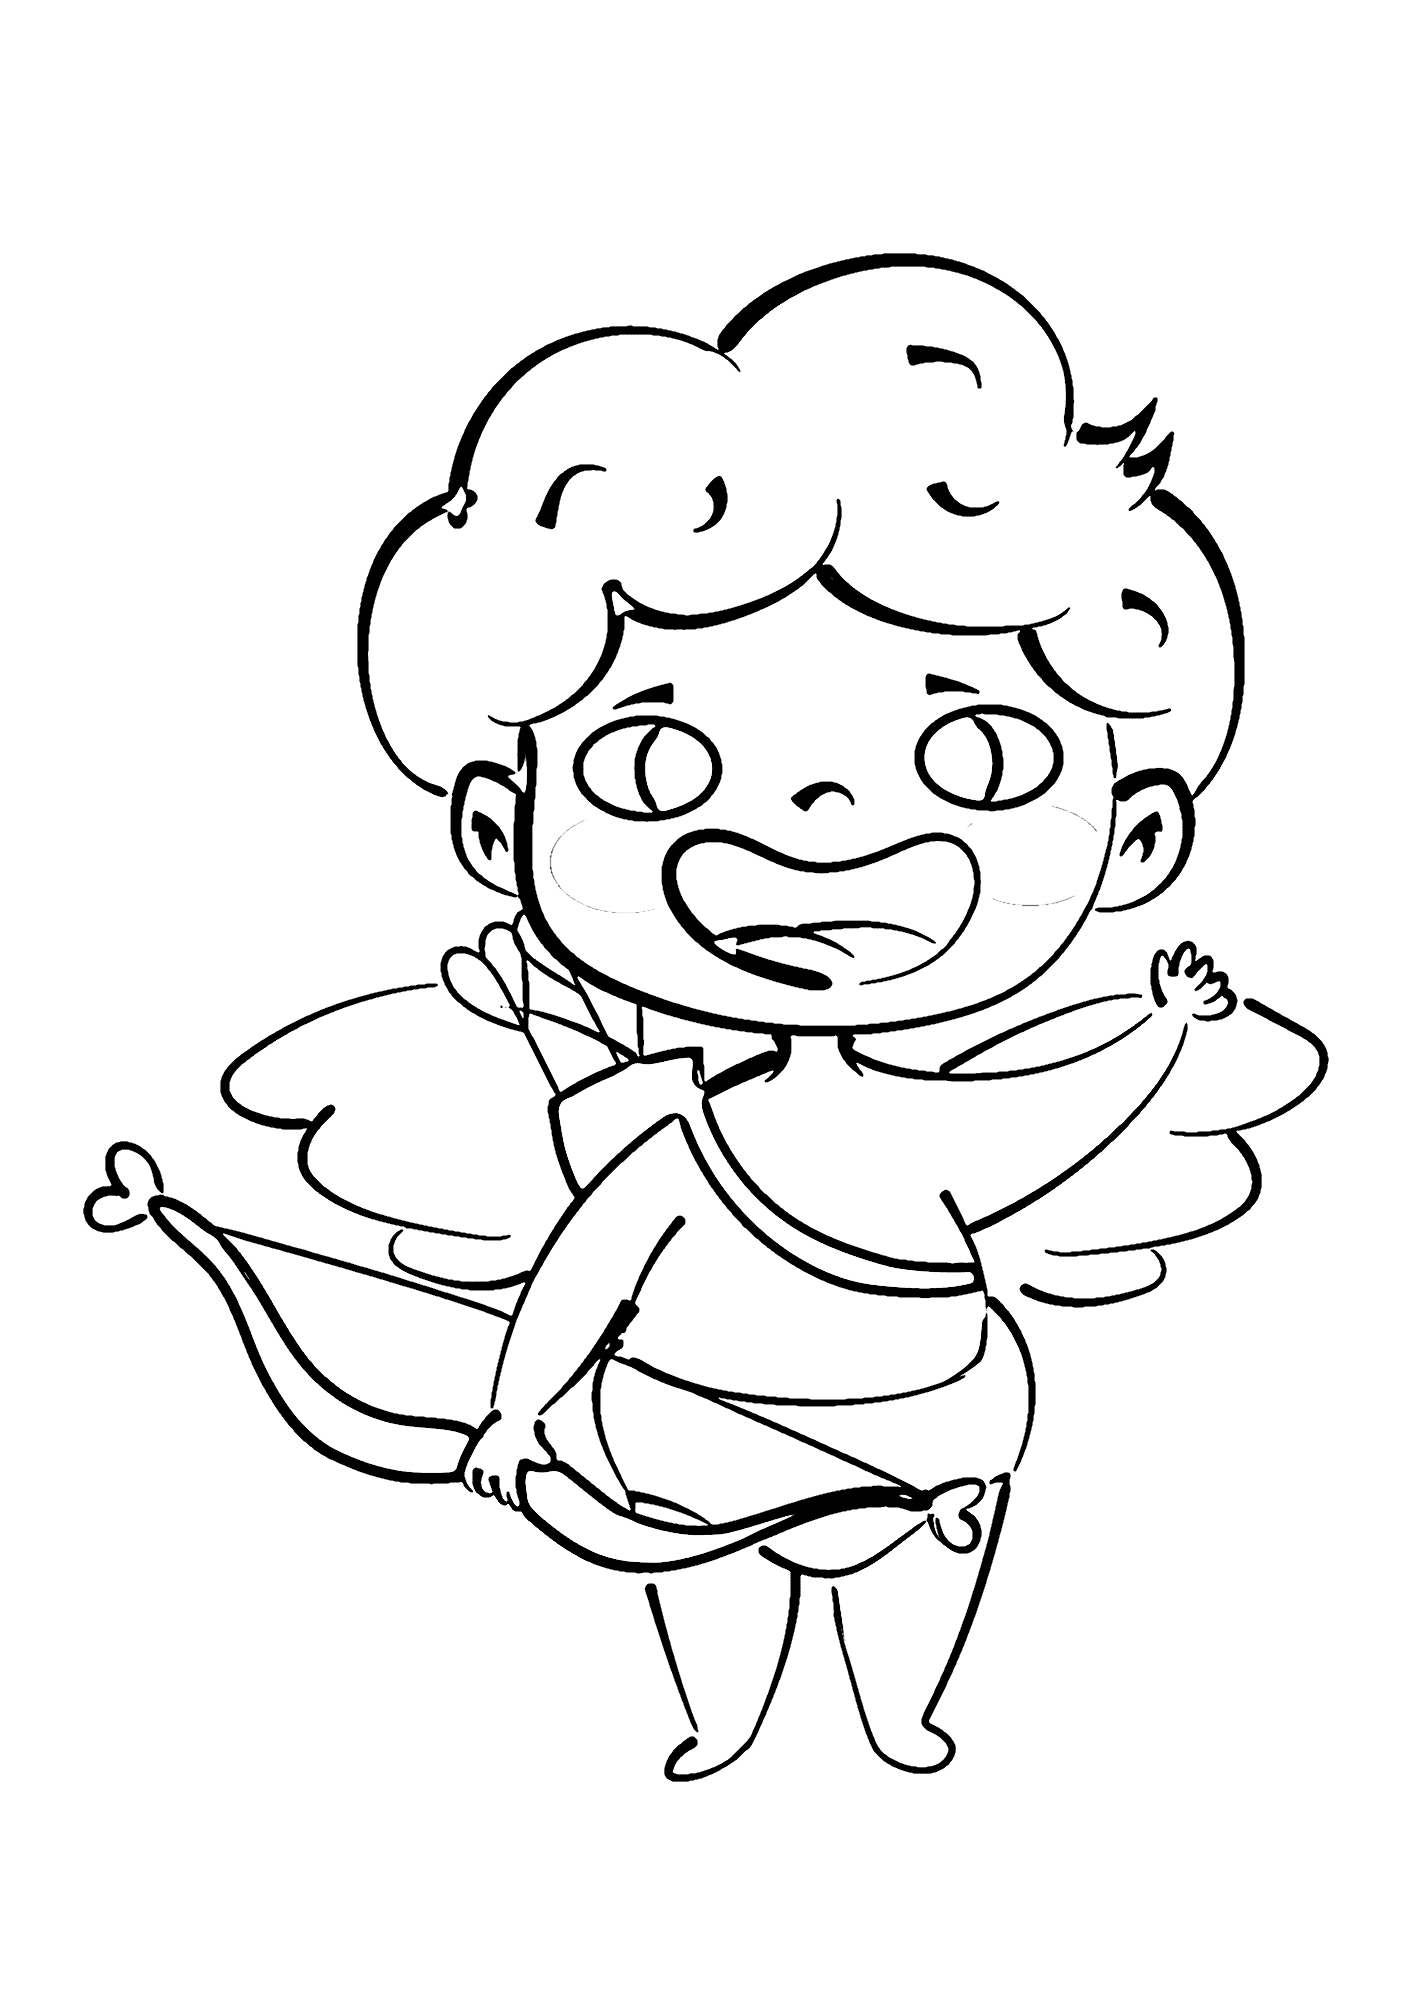 Cupid Valentine's Day Image For Children Coloring Pages